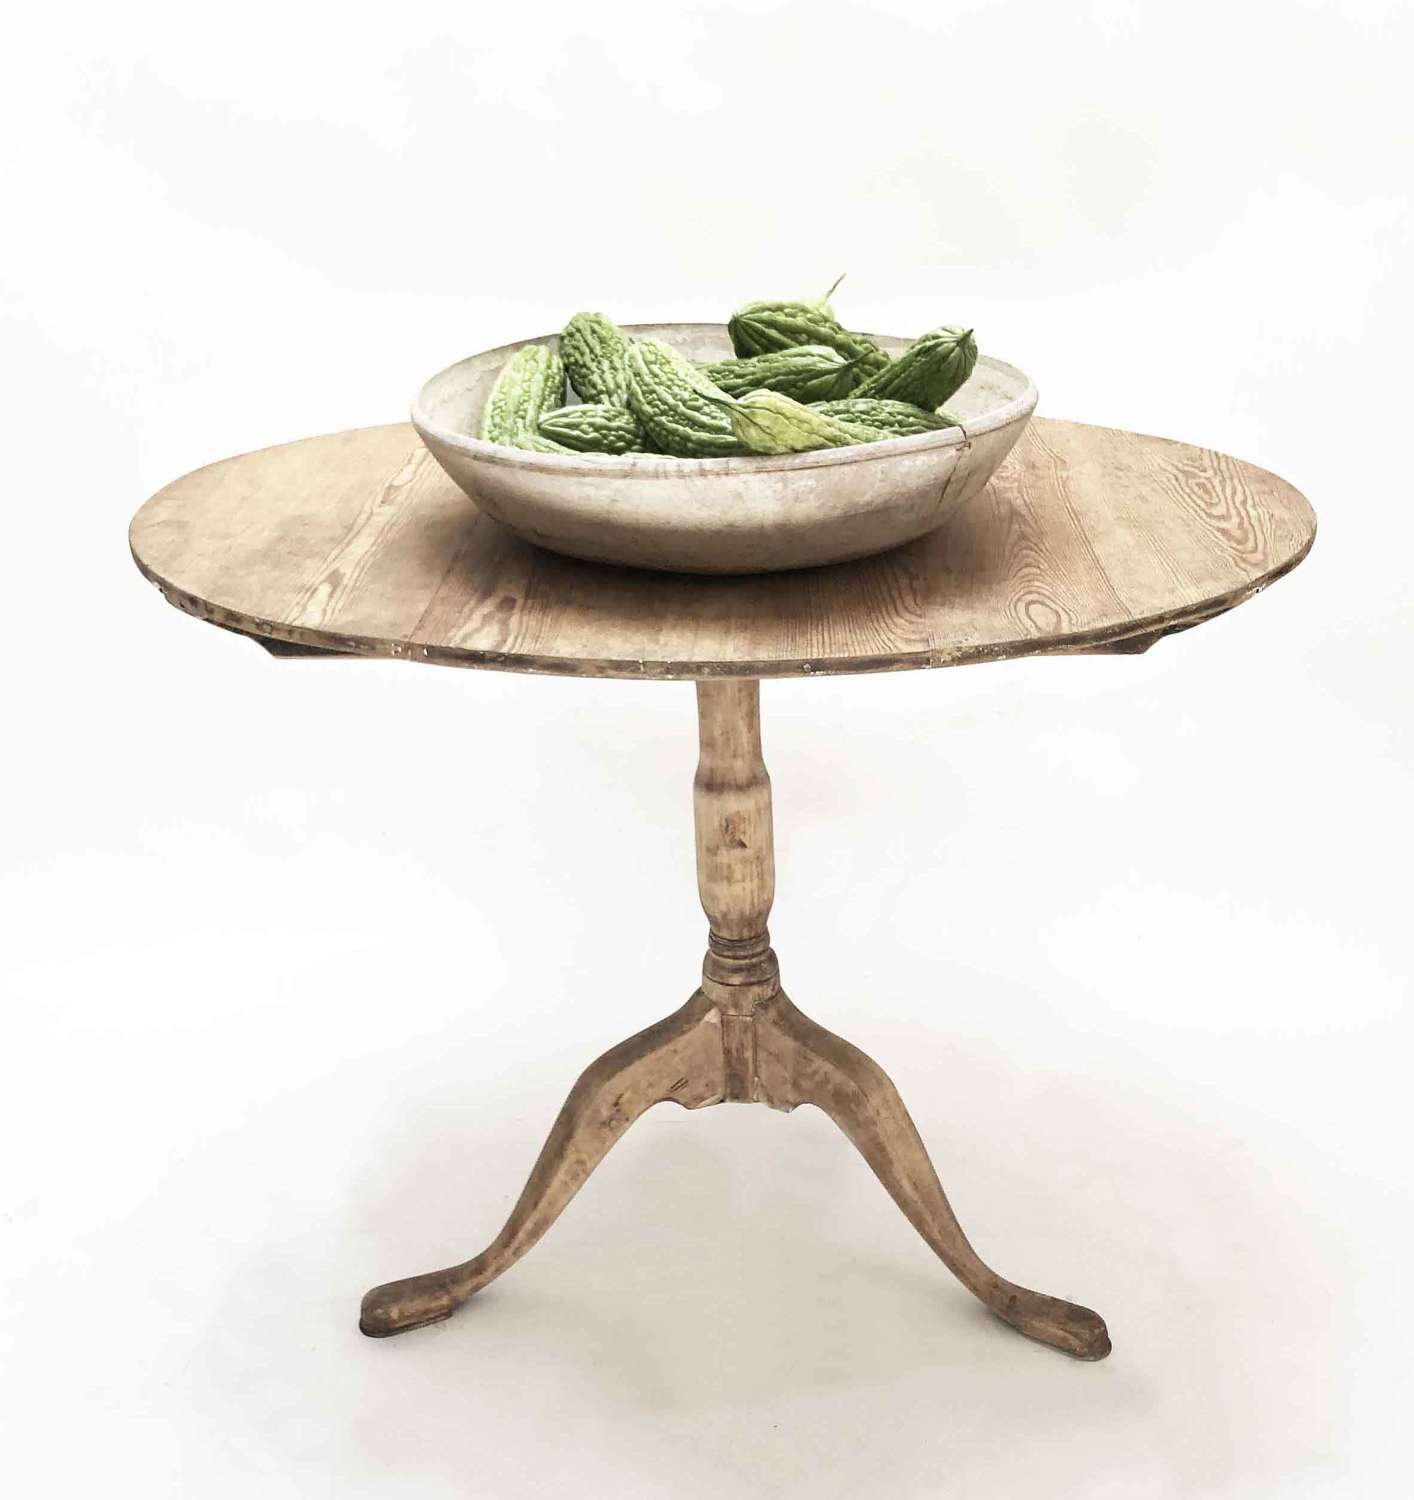 Early 19th c Swedish Oval Pine table with a Flip Top - Circa 1840